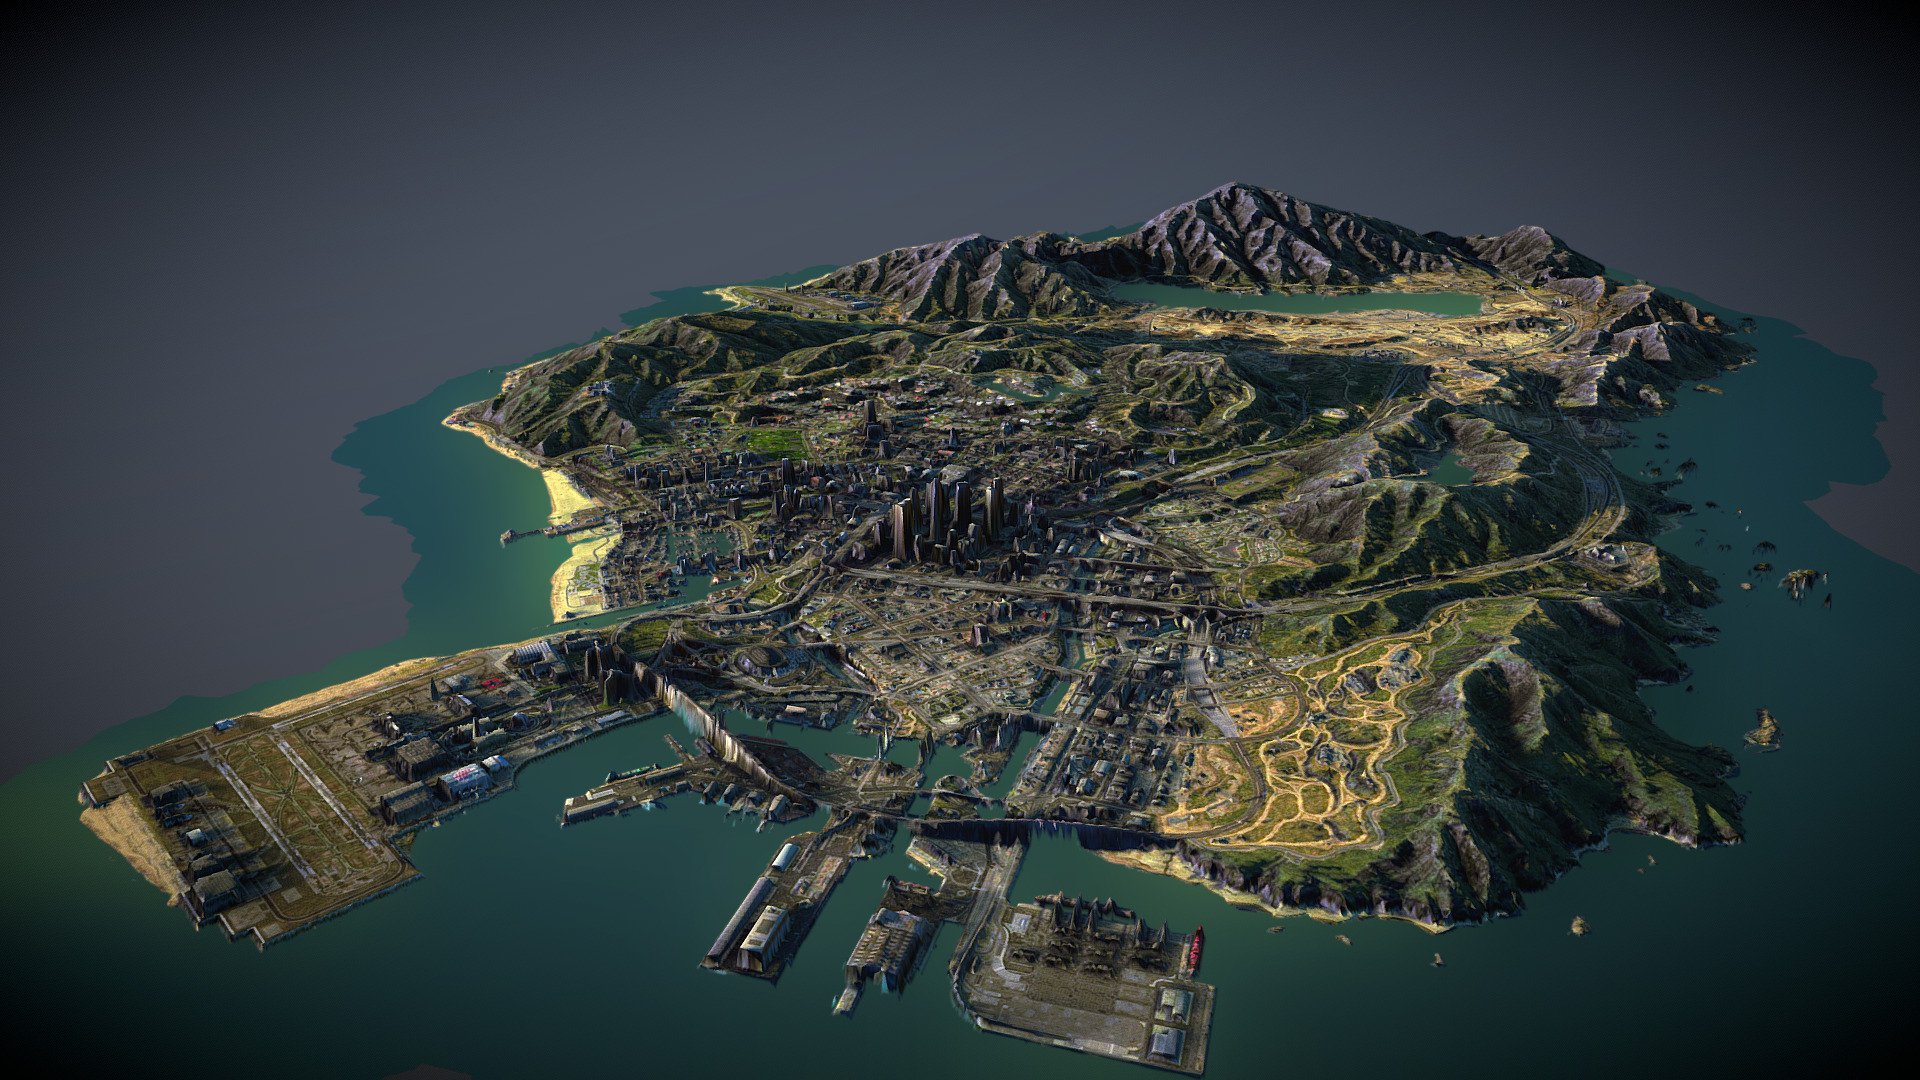 A 3d map of San Andreas from the game Grand Theft Auto V.

Check the Emission texture for an alternate night time map 3d model